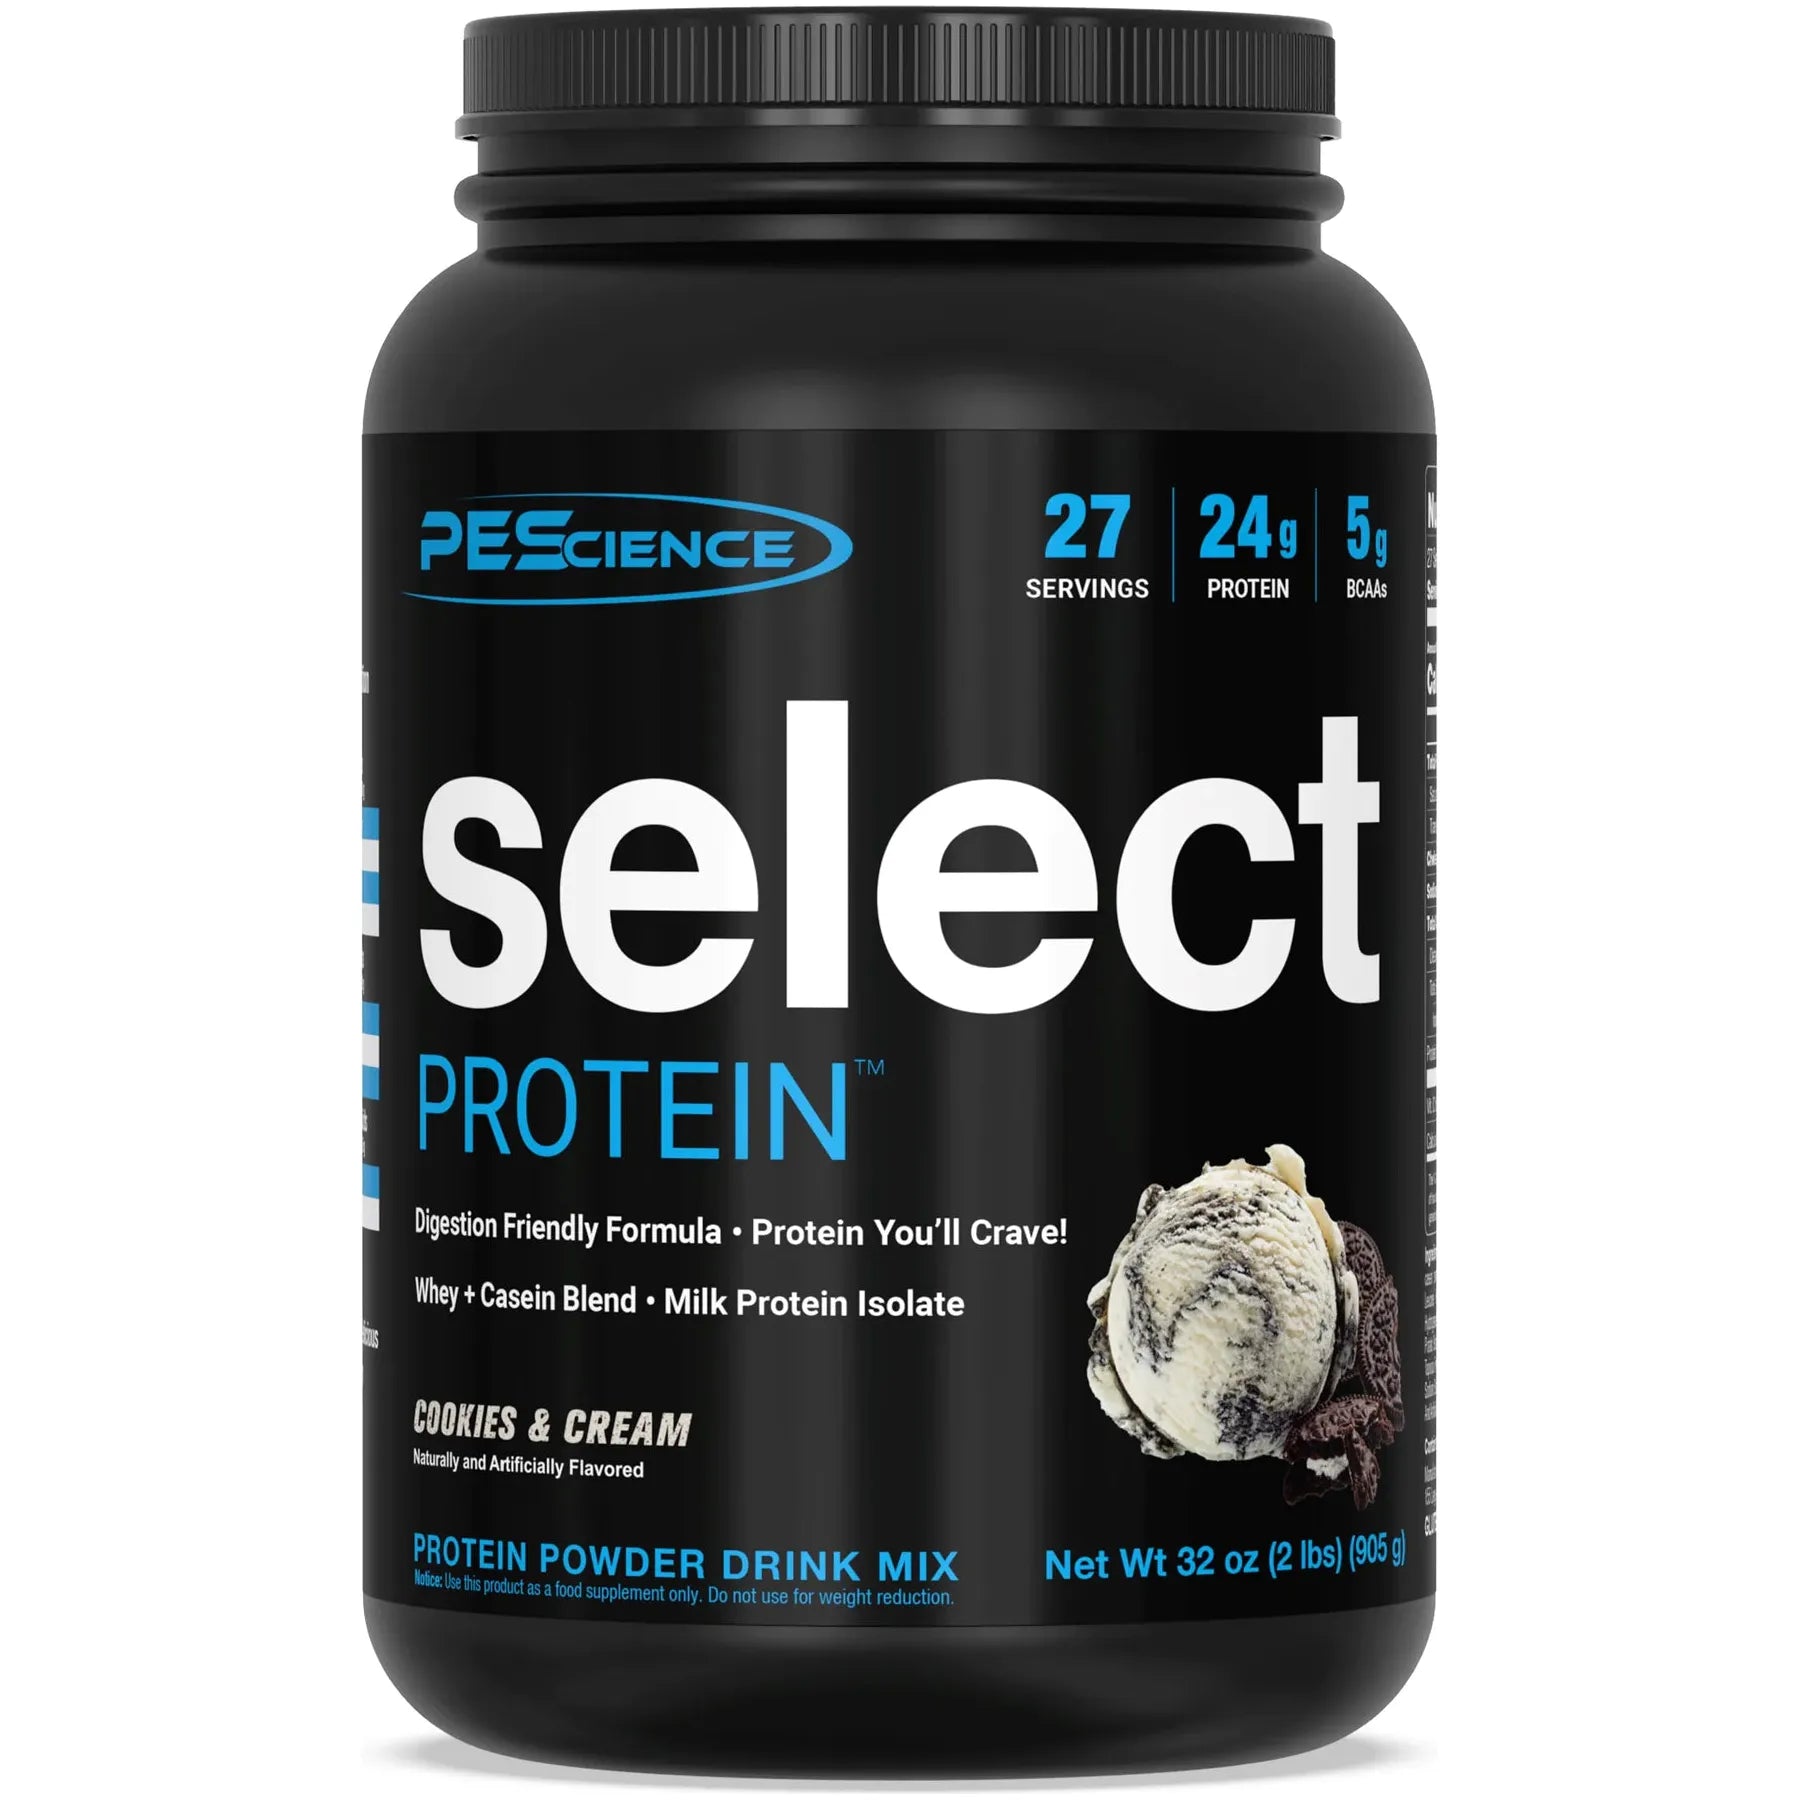 PEScience Select Protein (27 servings)